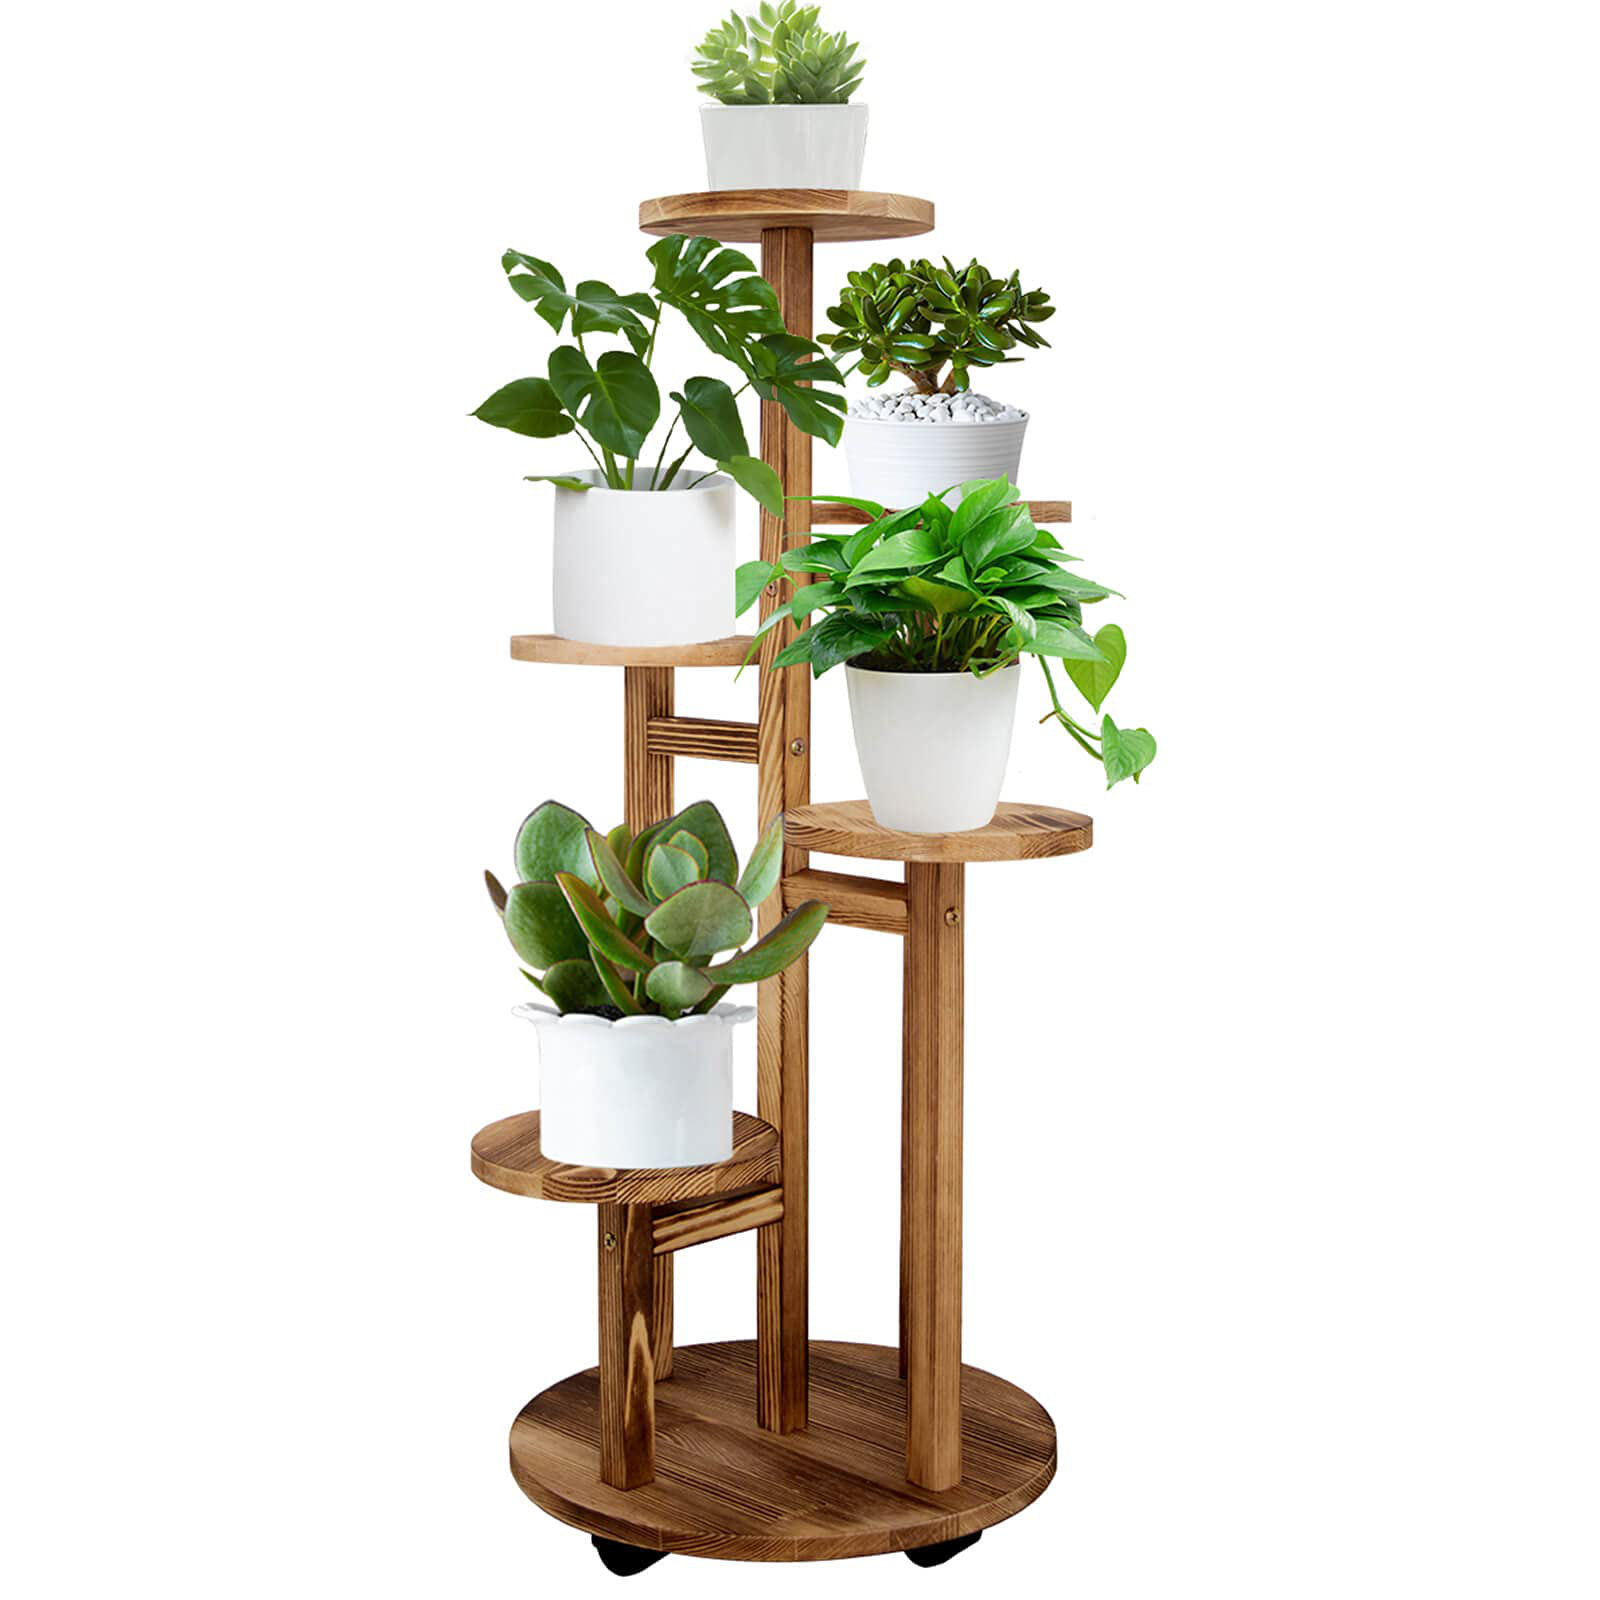 Ozzie Daisy Ground Plant Stand Arlmont & Co.